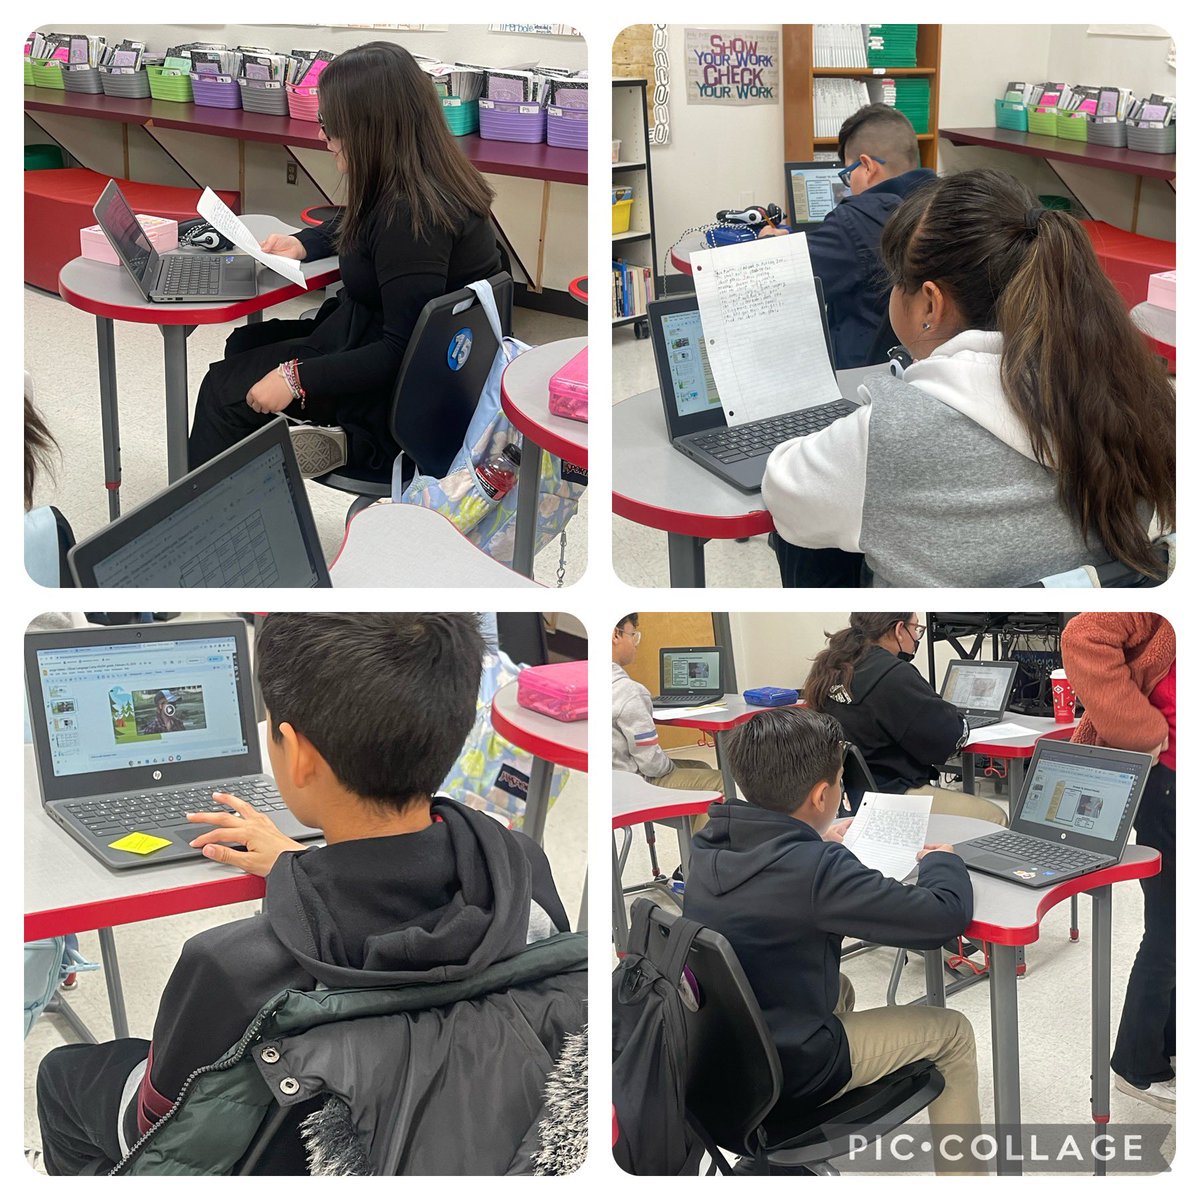 Our 5th graders are READY for this week’s TELPAS tests! Peer feedback, Flipgrid, and strategic strategies 🔥They’ve put in a lot of hard work. No doubt their time, efforts, perseverance and Crusader Pride will make them shine 🤩 @VHESCrusaders